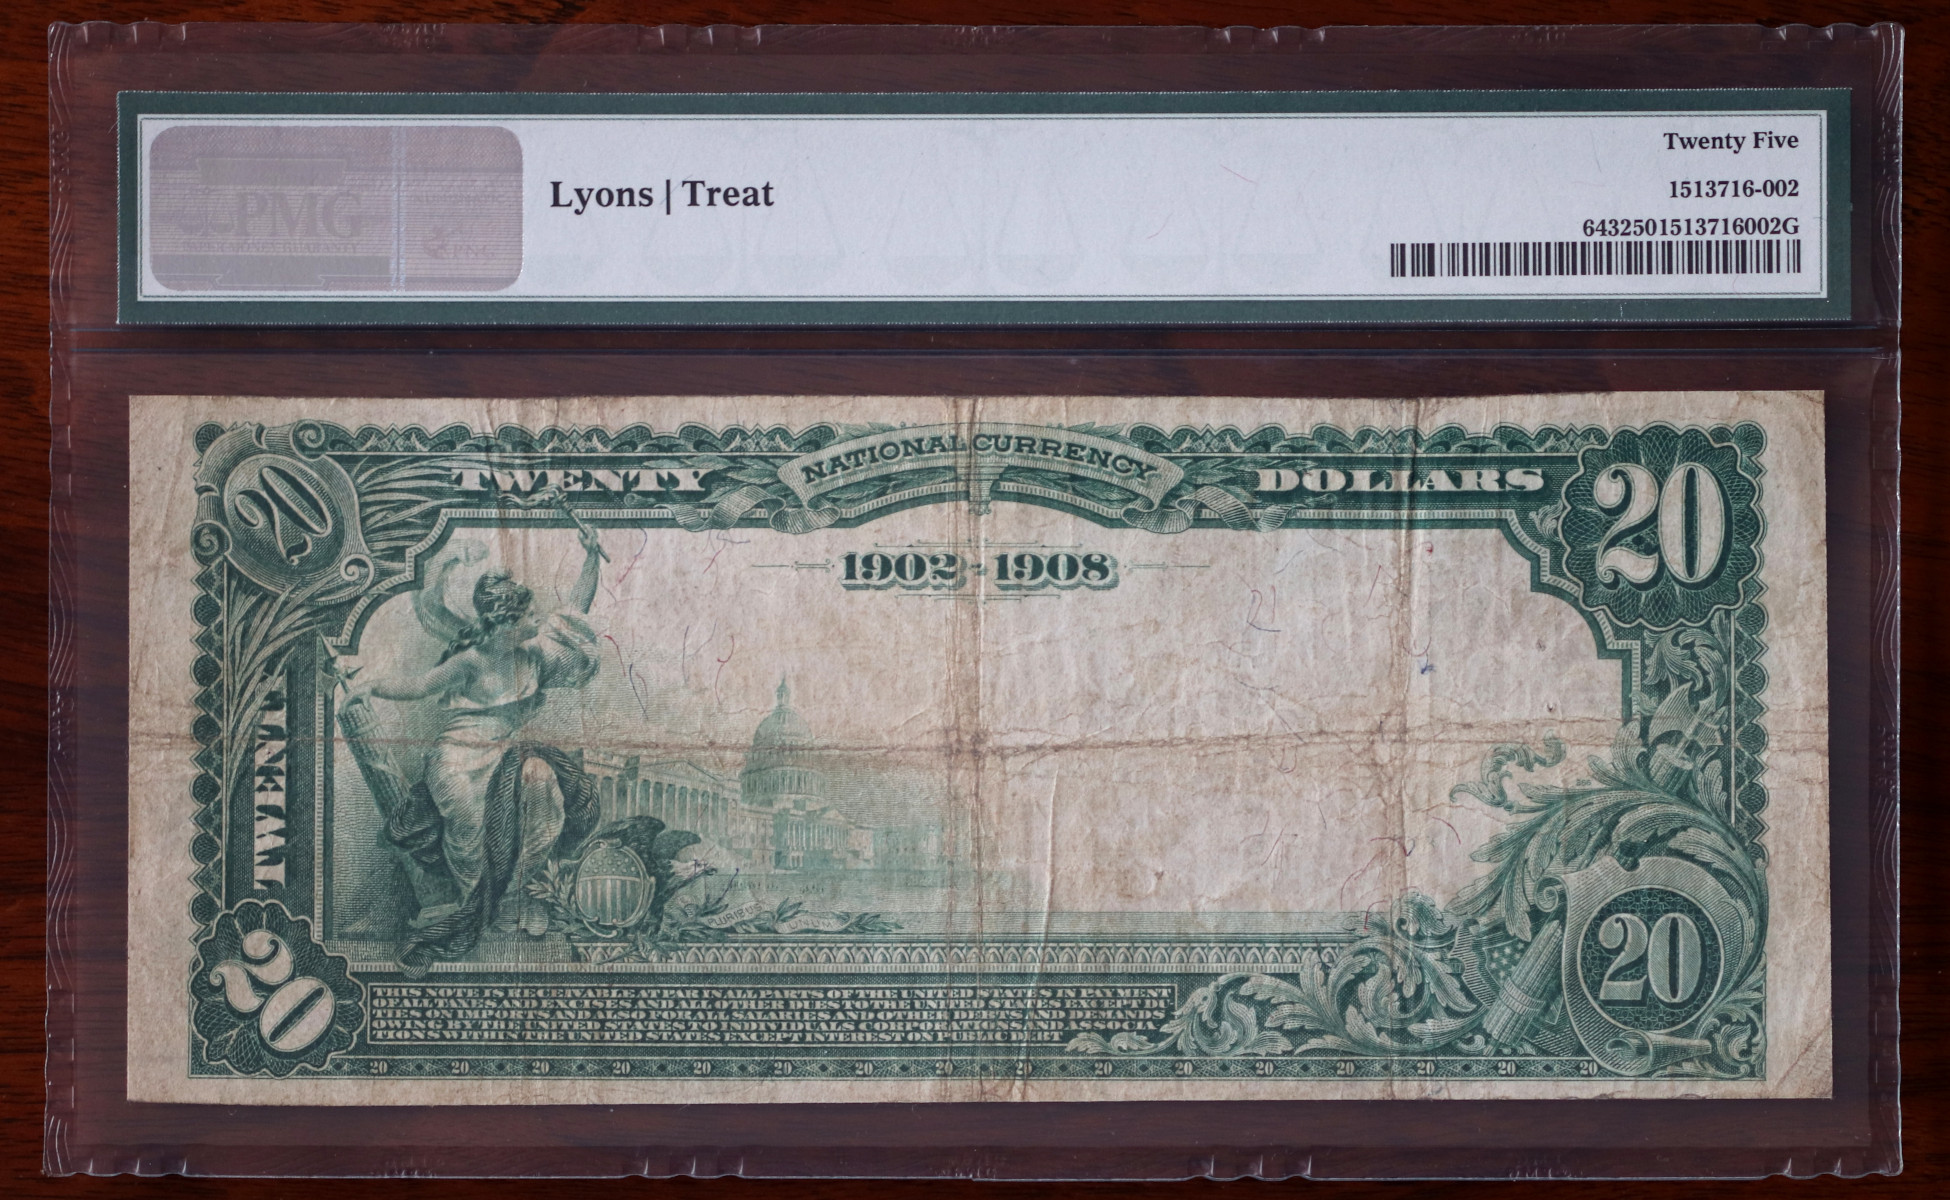 A $20 National Bank Note, Redondo Beach, certified PMG Very Fine 25, from The South Bay Collection of Rare National Bank Notes, offered by Palos Verdes Coin Exchange